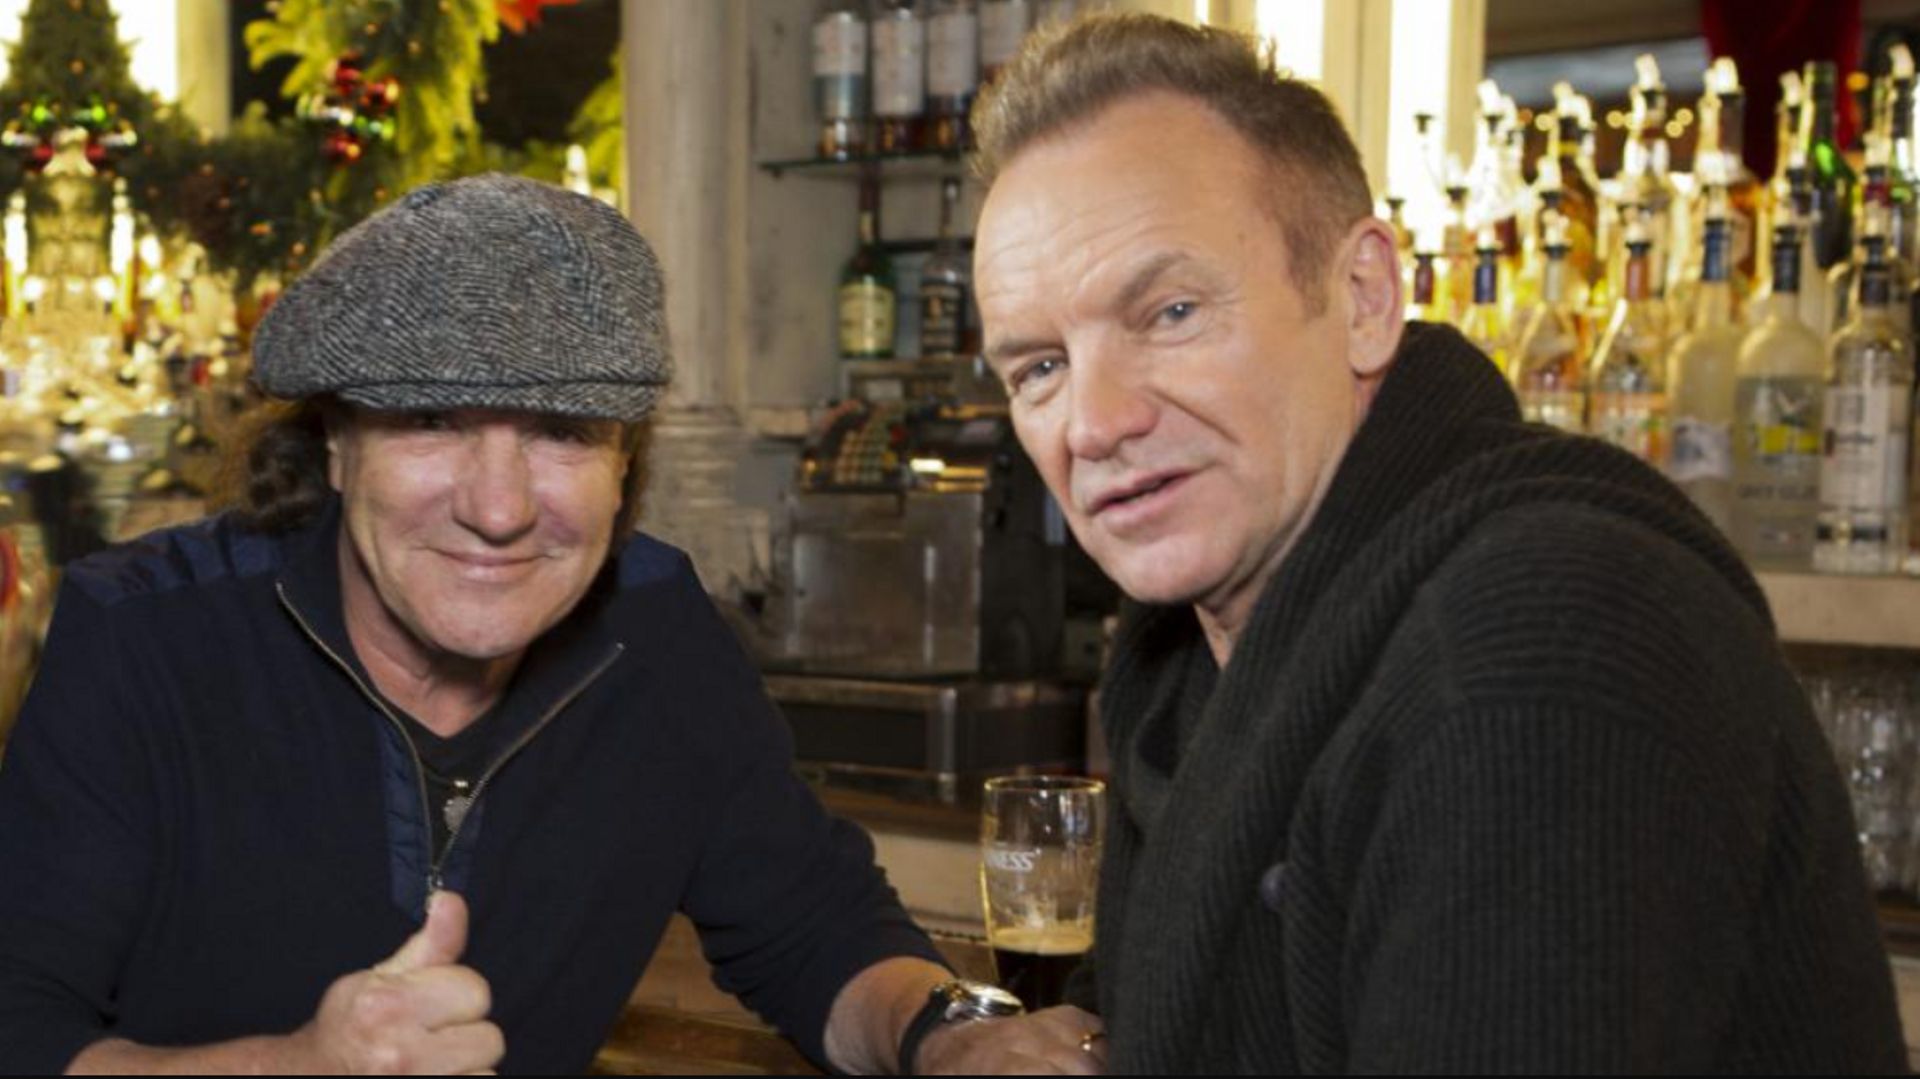 tempo-brian-johnson-s-a-life-on-the-road-quand-acdc-rencontre-sting